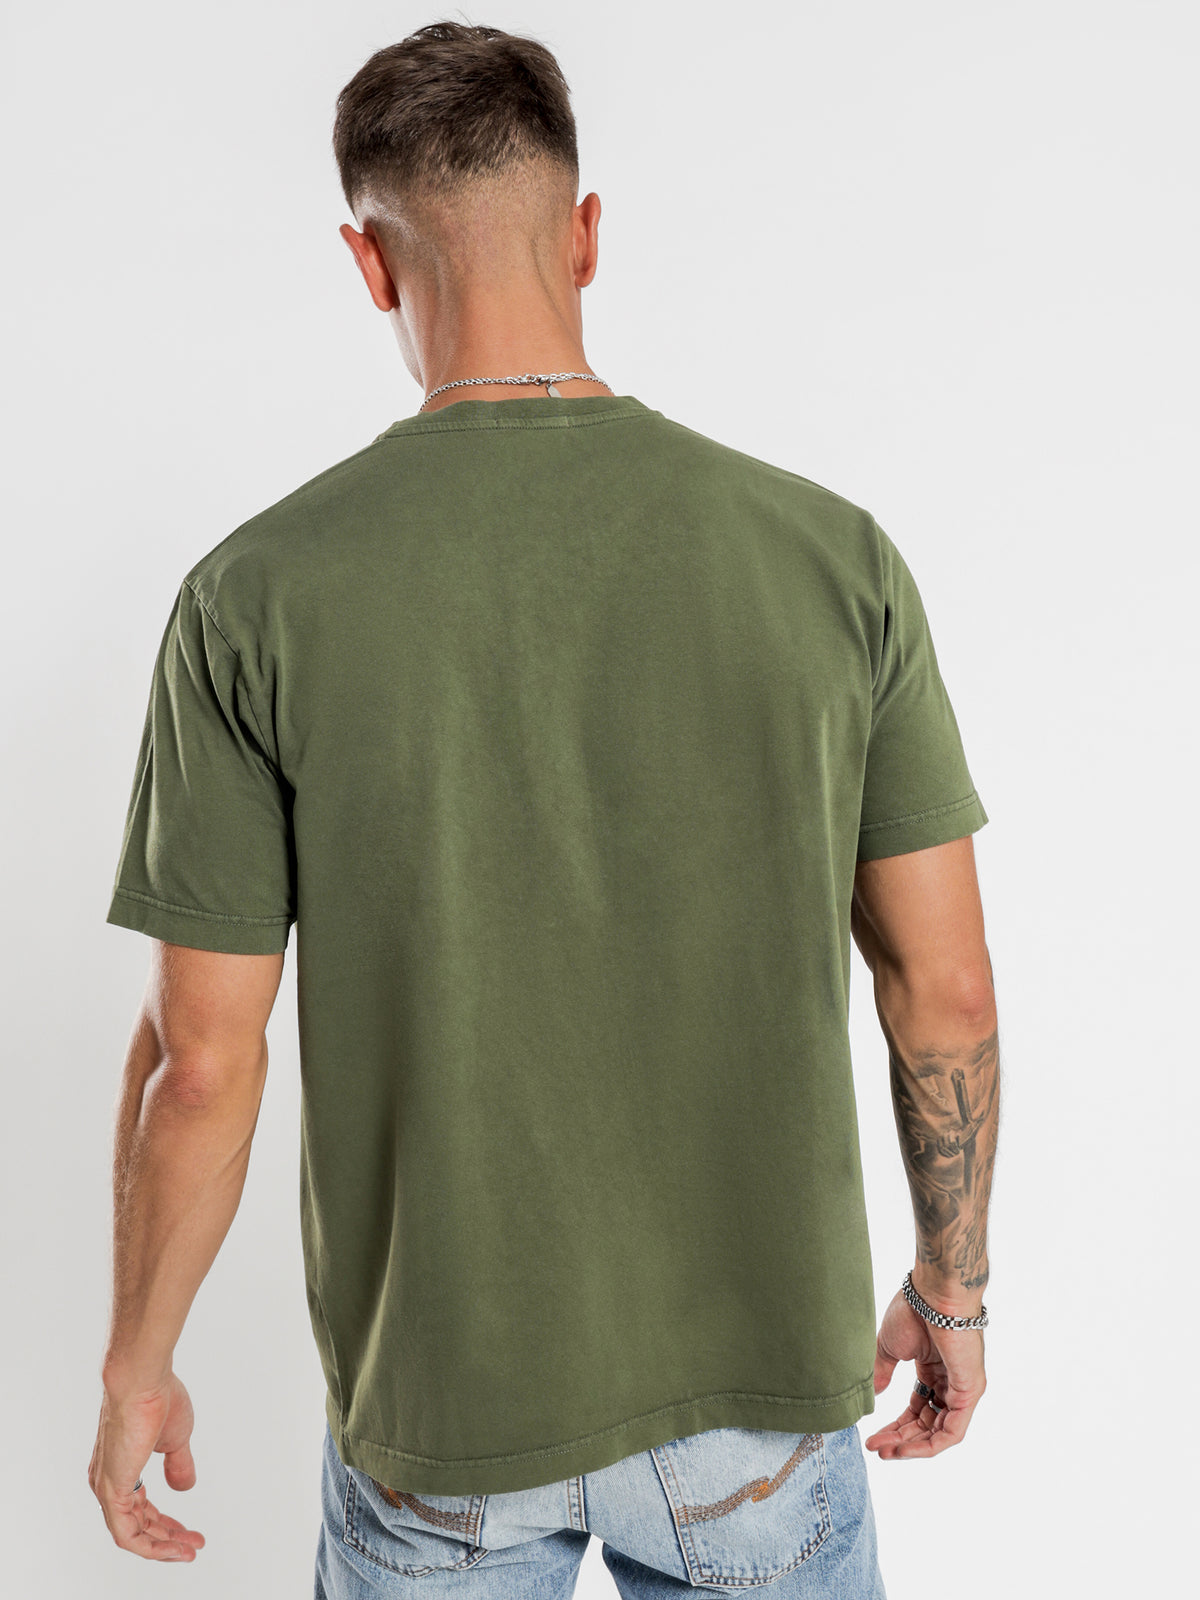 Uno Njco Circle T-Shirt in Olive